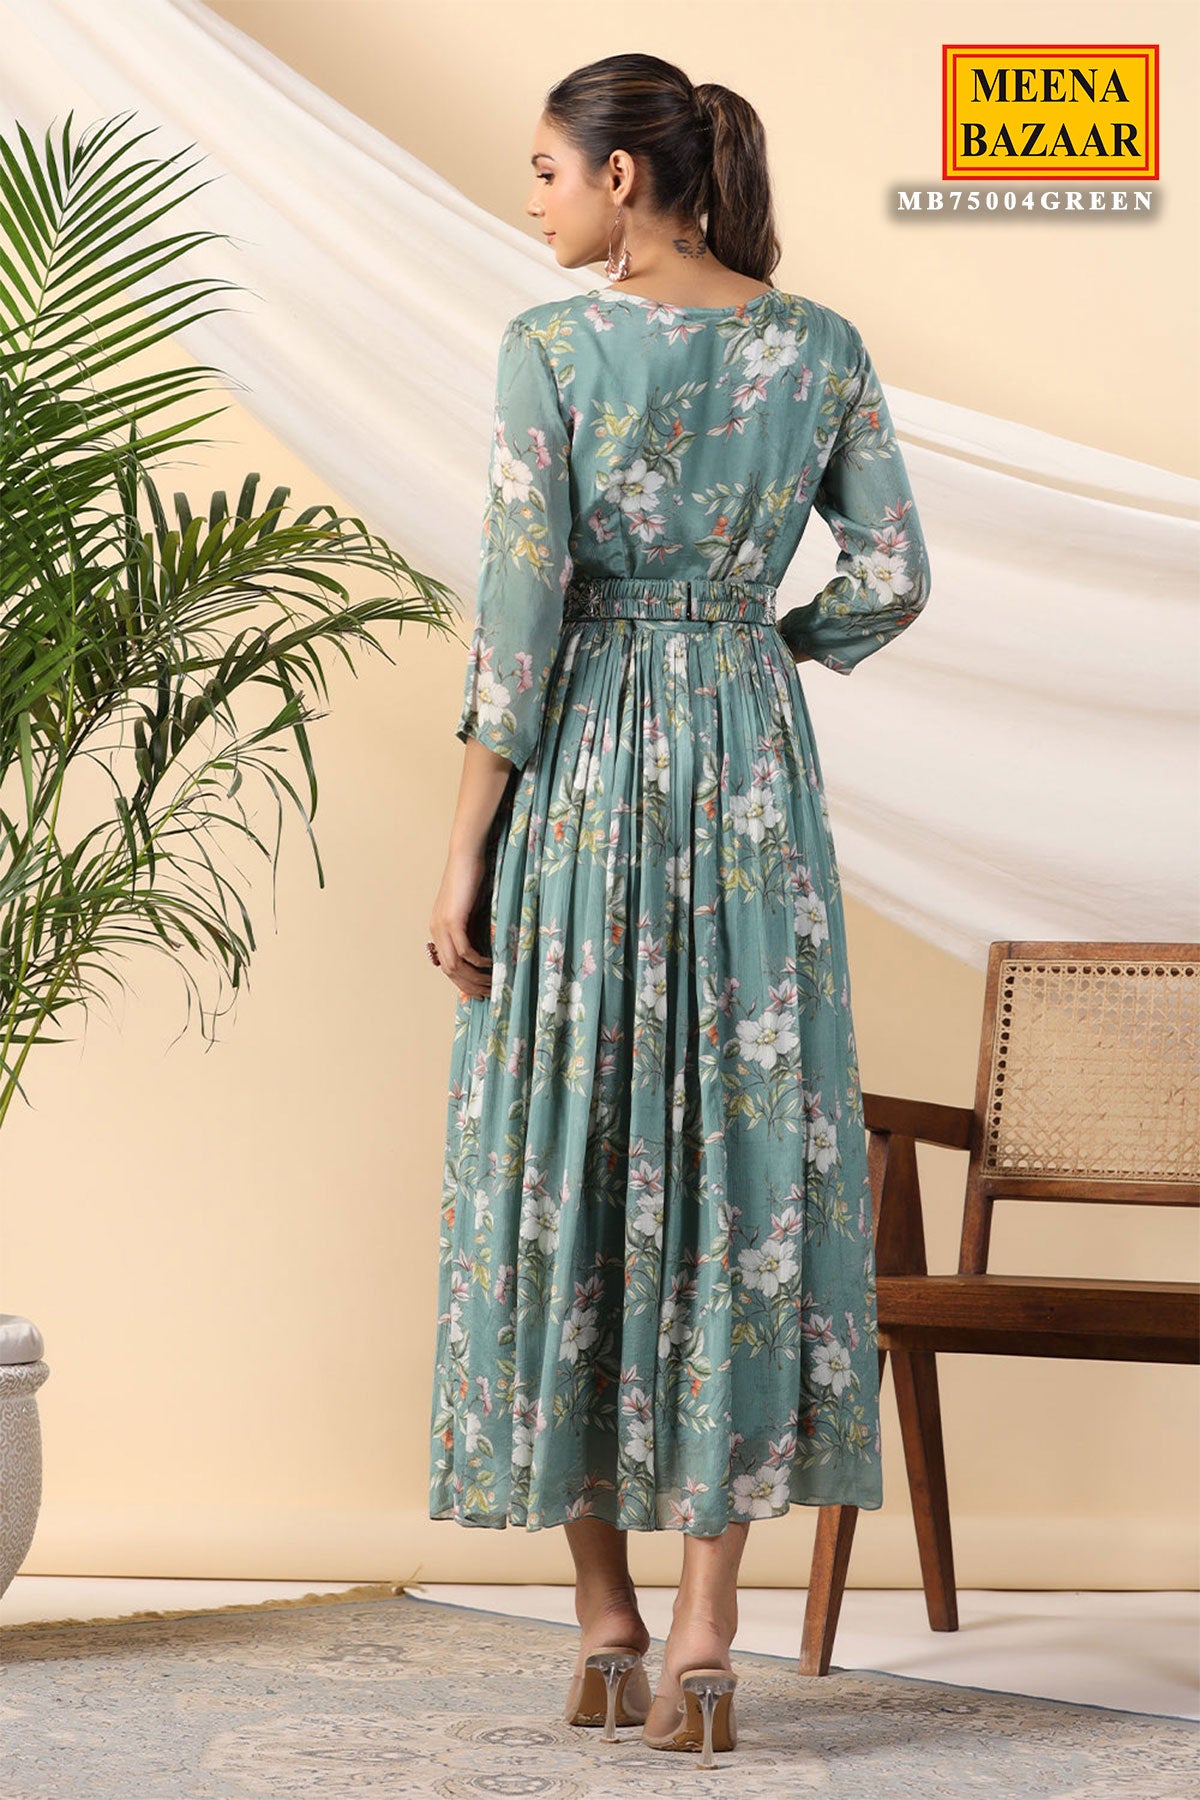 Green Crepe Floral Printed Kurti Dress with Neck Embroidery